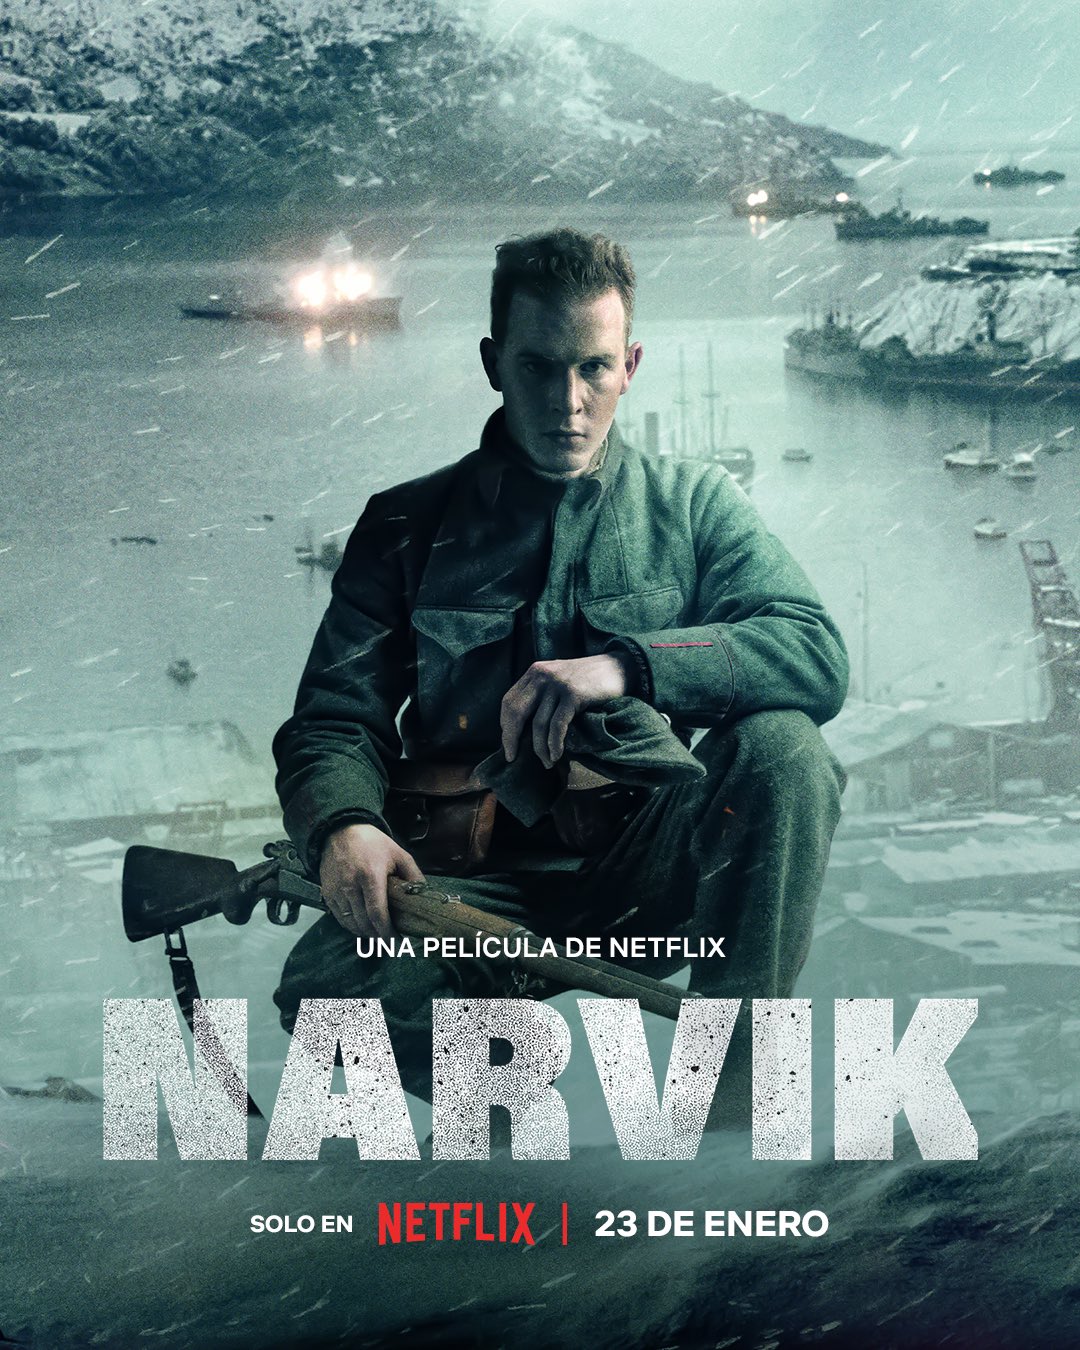 "narvik" It is a new war title that was going to be released in 2019, but it was postponed until the beginning of this year.  (Netflix)